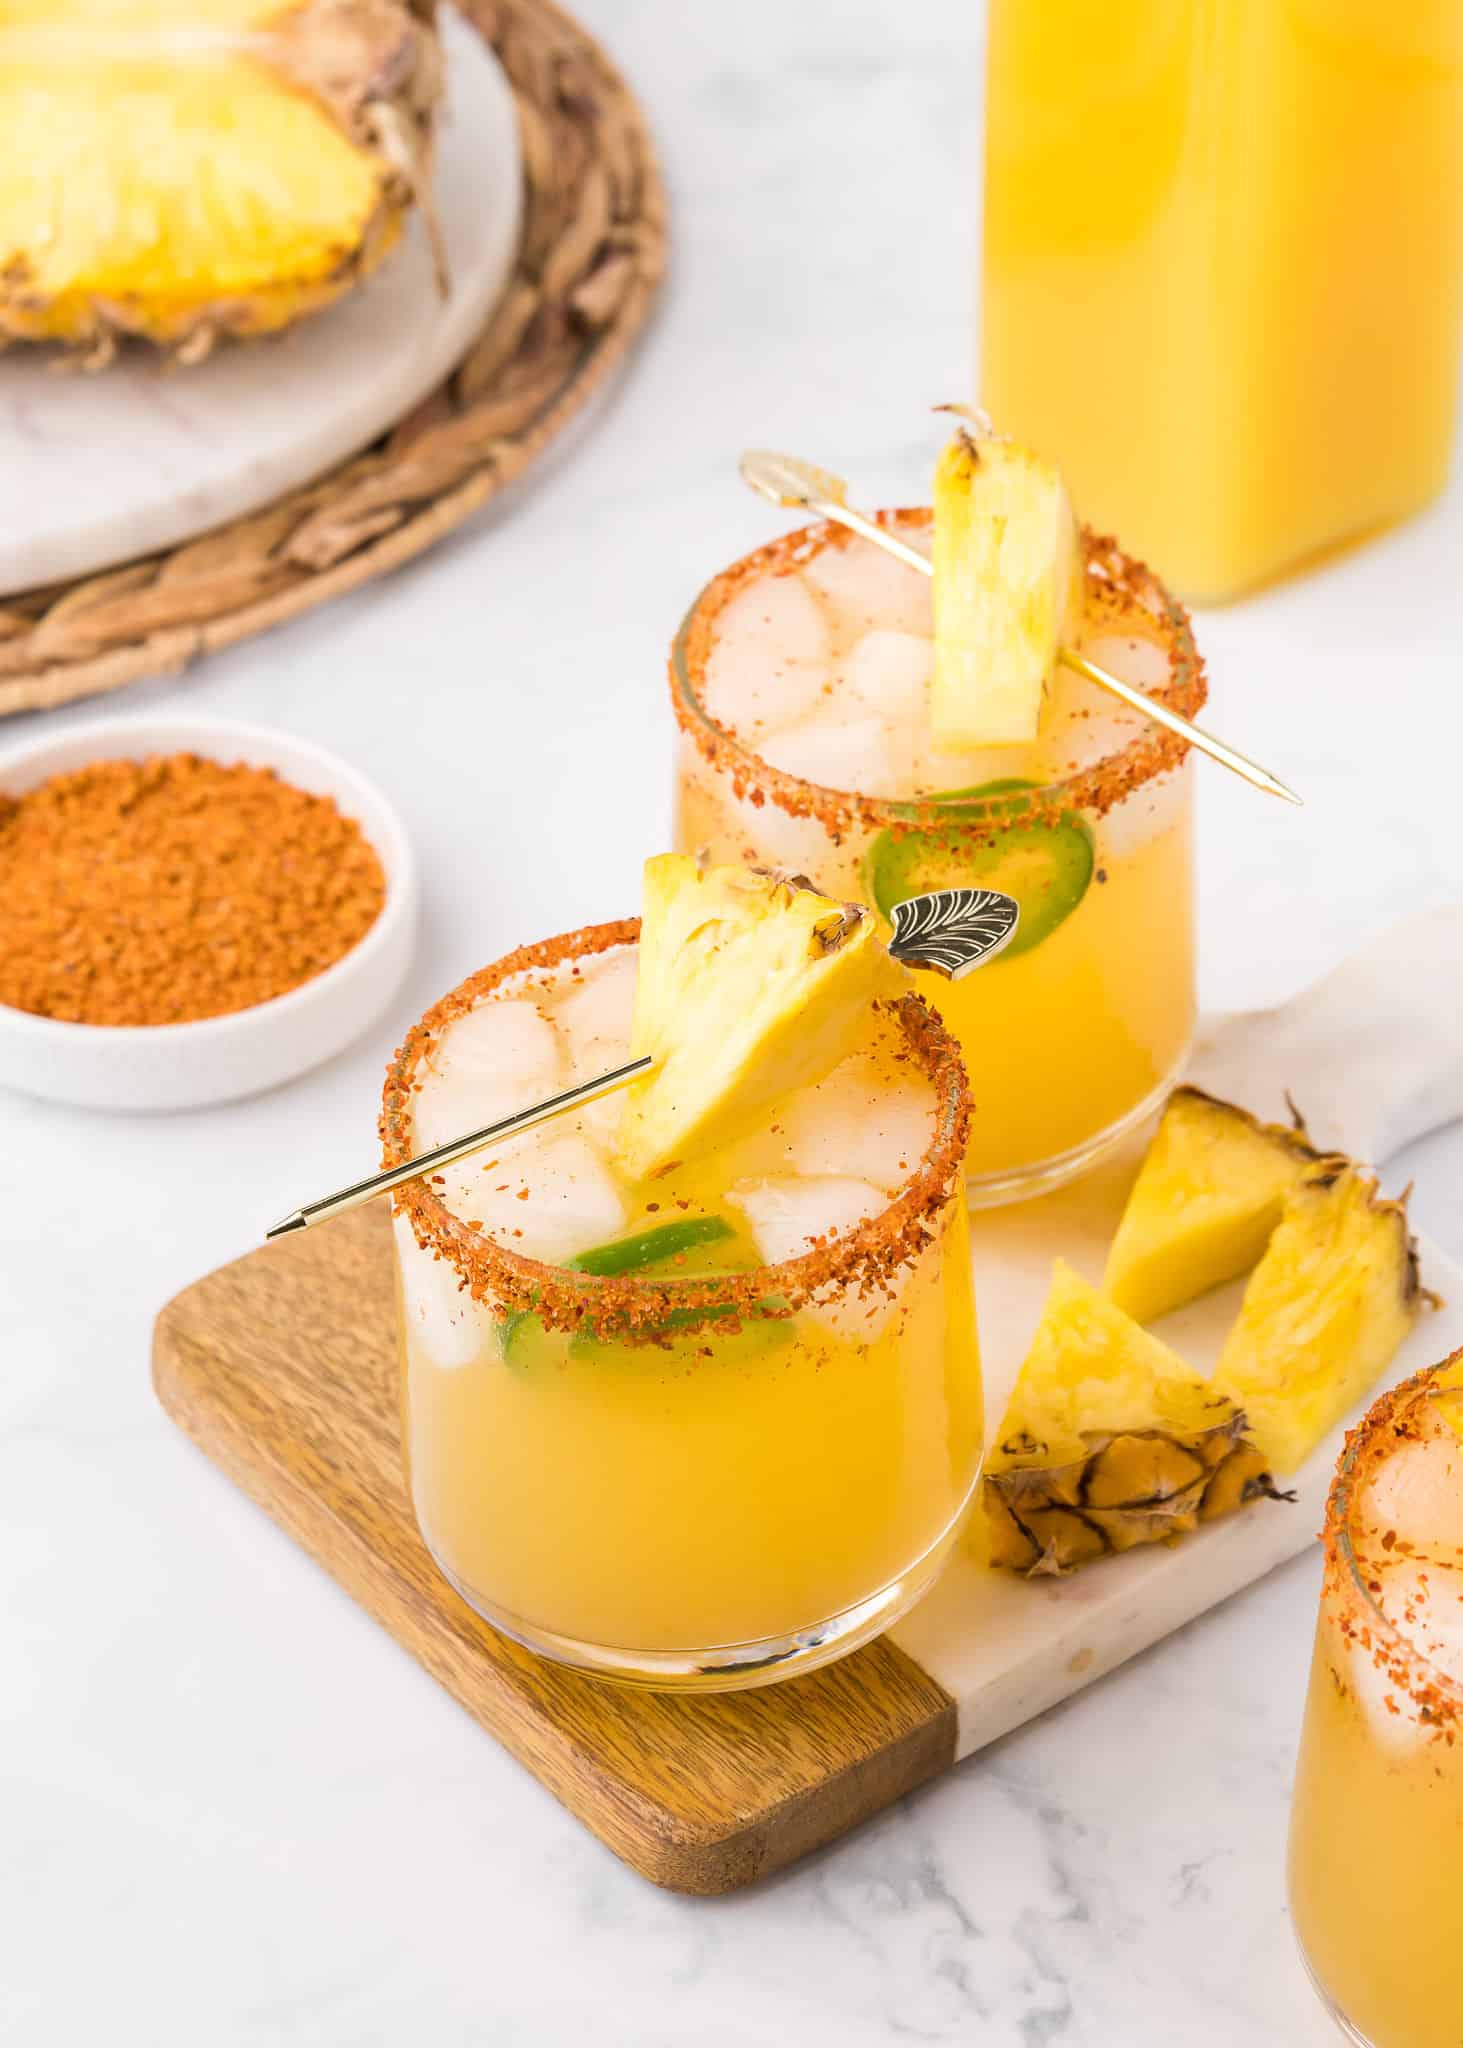 Spicy Pineapple Ginger Mocktail (spicy mocktail with pineapple juice)